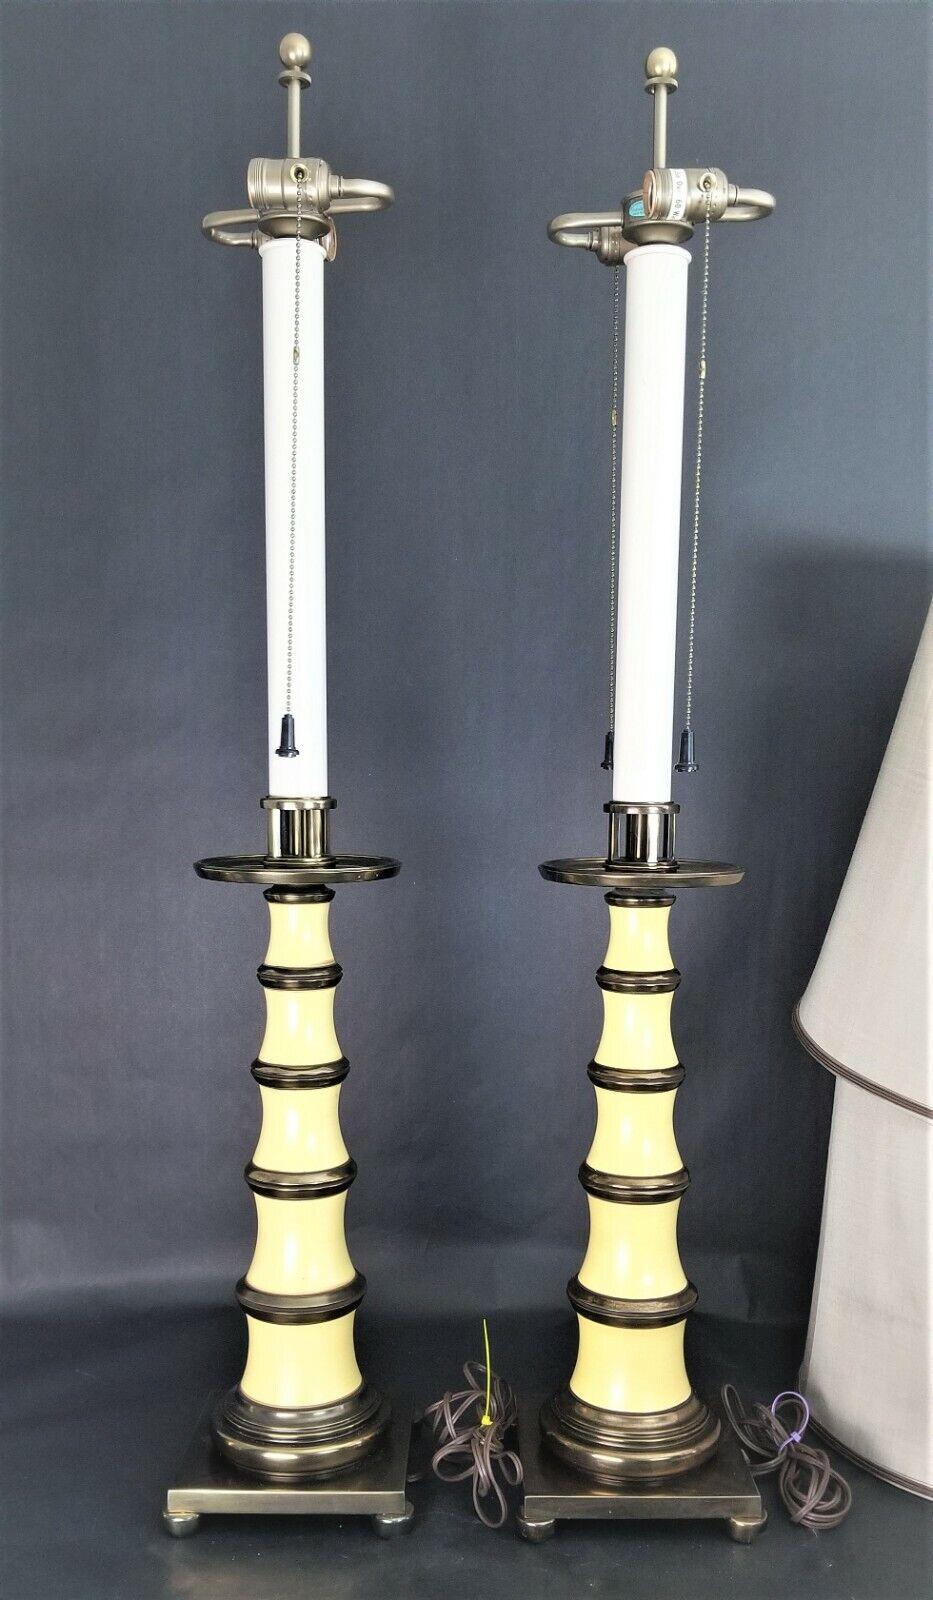 Stiffel Enamel Brass Candlestick Lamps with Dupioni Silk Shades In Good Condition For Sale In Lake Worth, FL